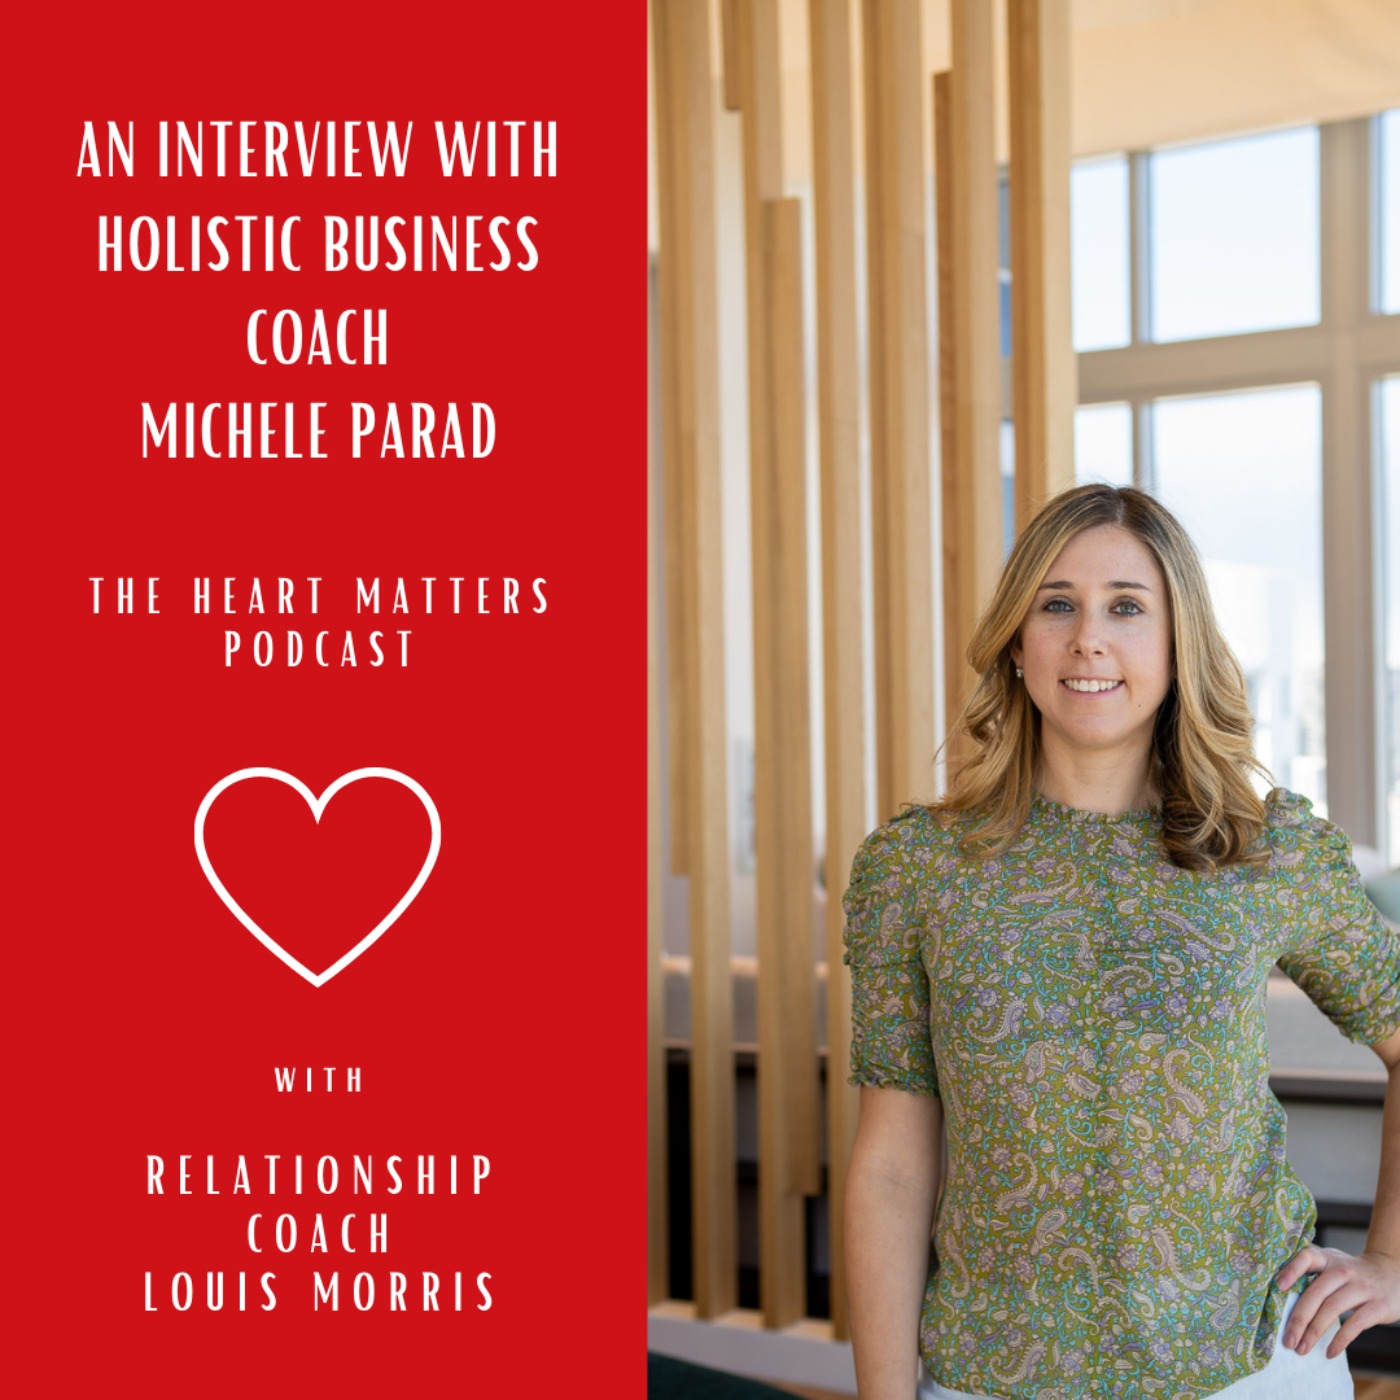 An Interview With Holistic Business Coach Michele Parad